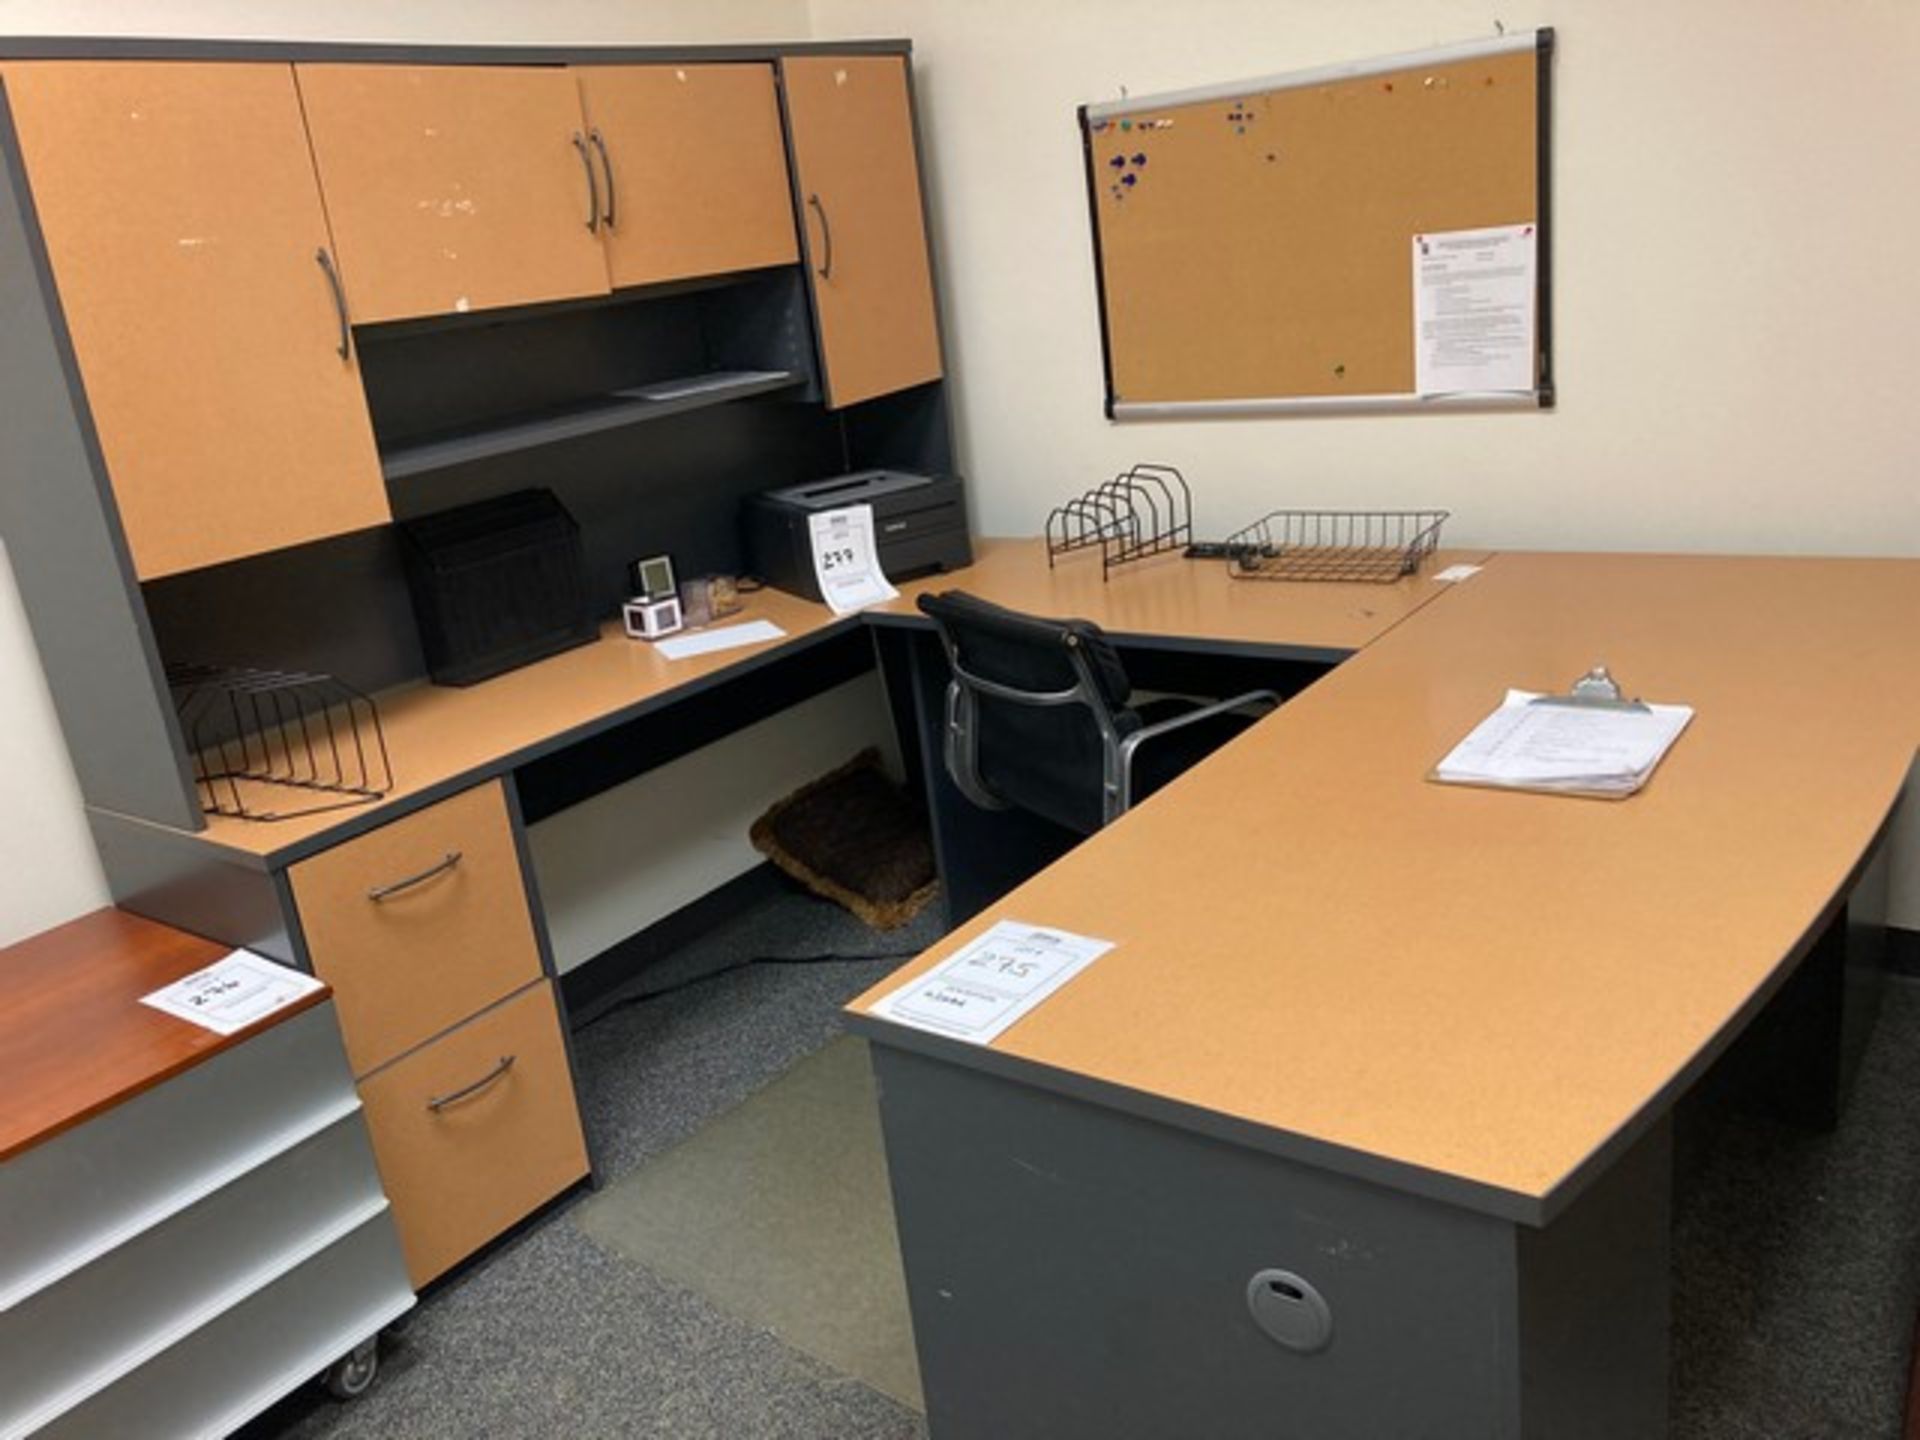 C SHAPED DESK WITH OVERSHELF (SUITE 205) - Image 2 of 2